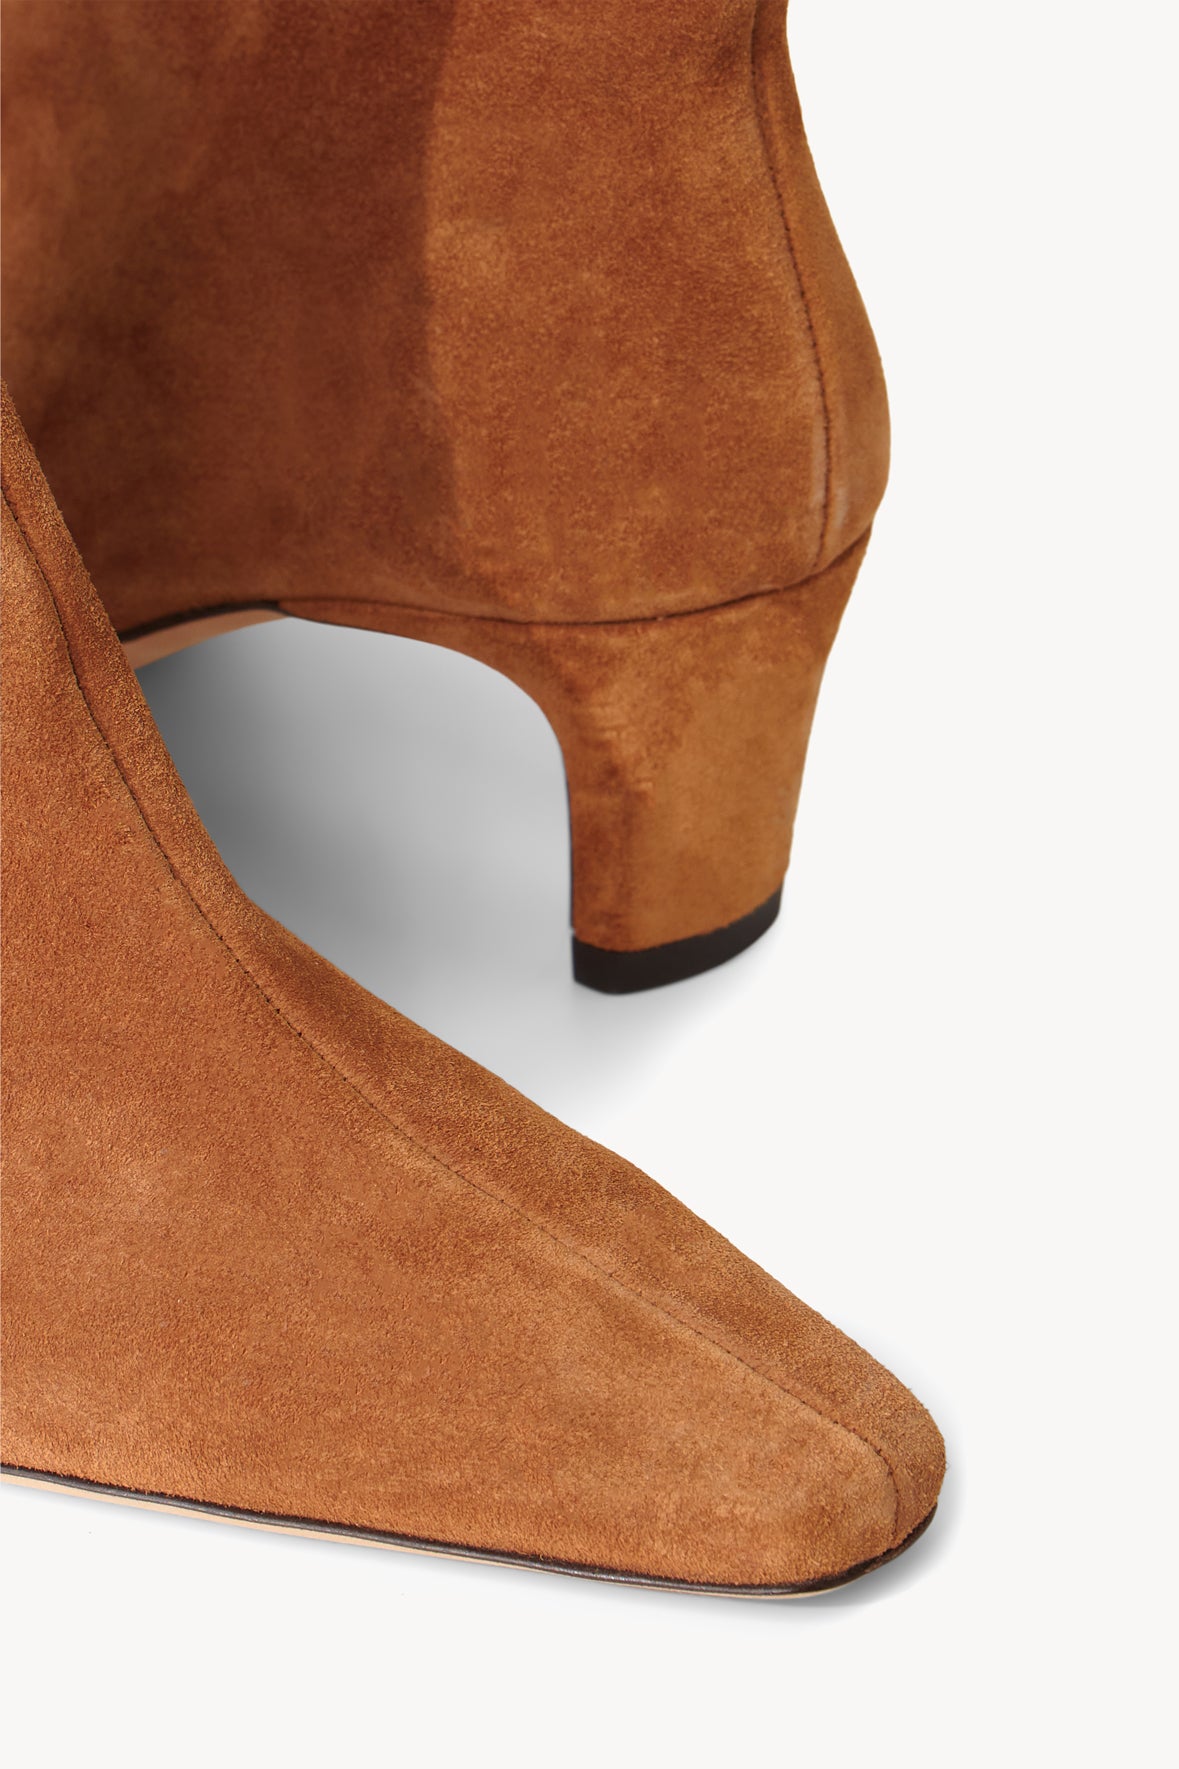 Wally Ankle Boot, Tan Suede